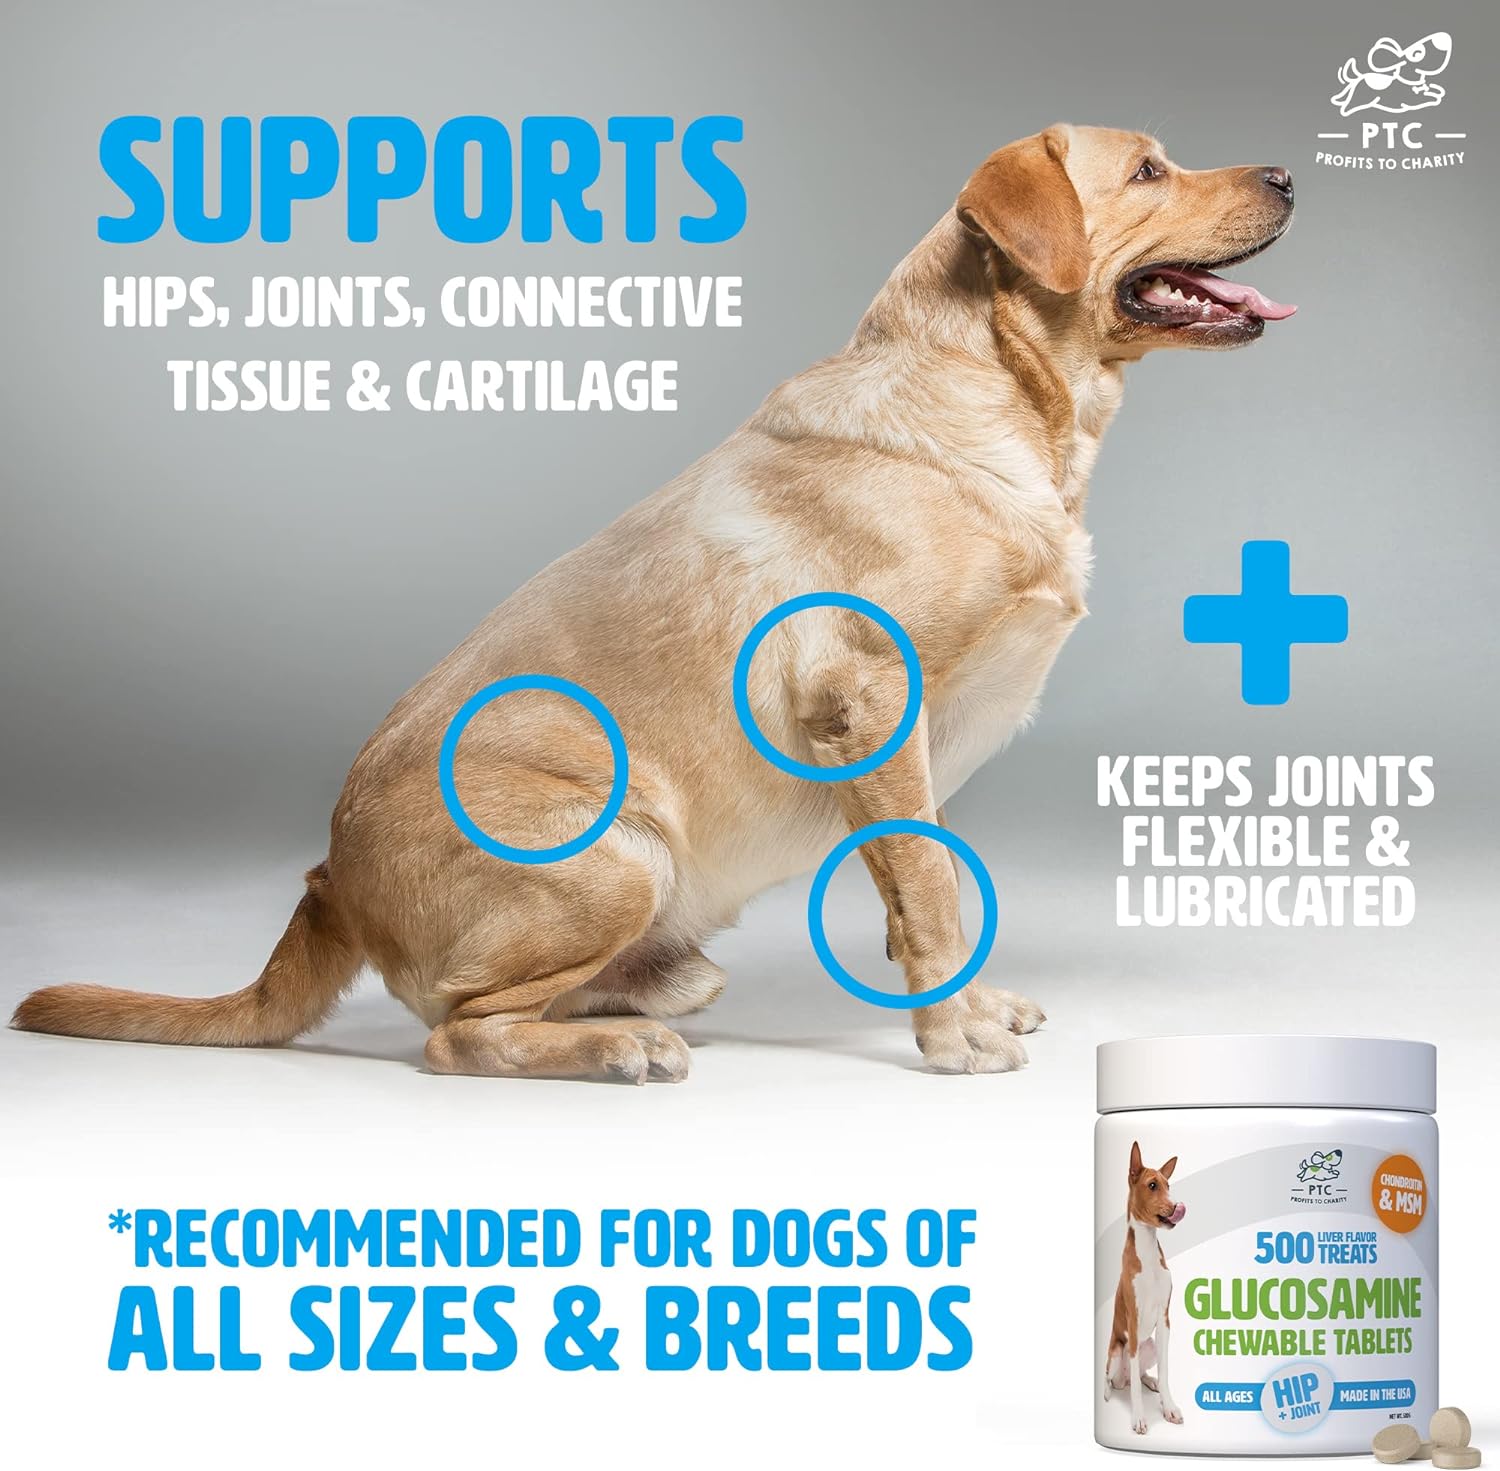 Glucosamine for Dogs with Chondroitin and MSM - Hip and Joint Supplement for Dog Mobility Support and Arthritis Pain Relief - 500 Chewable Tablet Treats by PTC - Profits to Charity : Pet Supplies